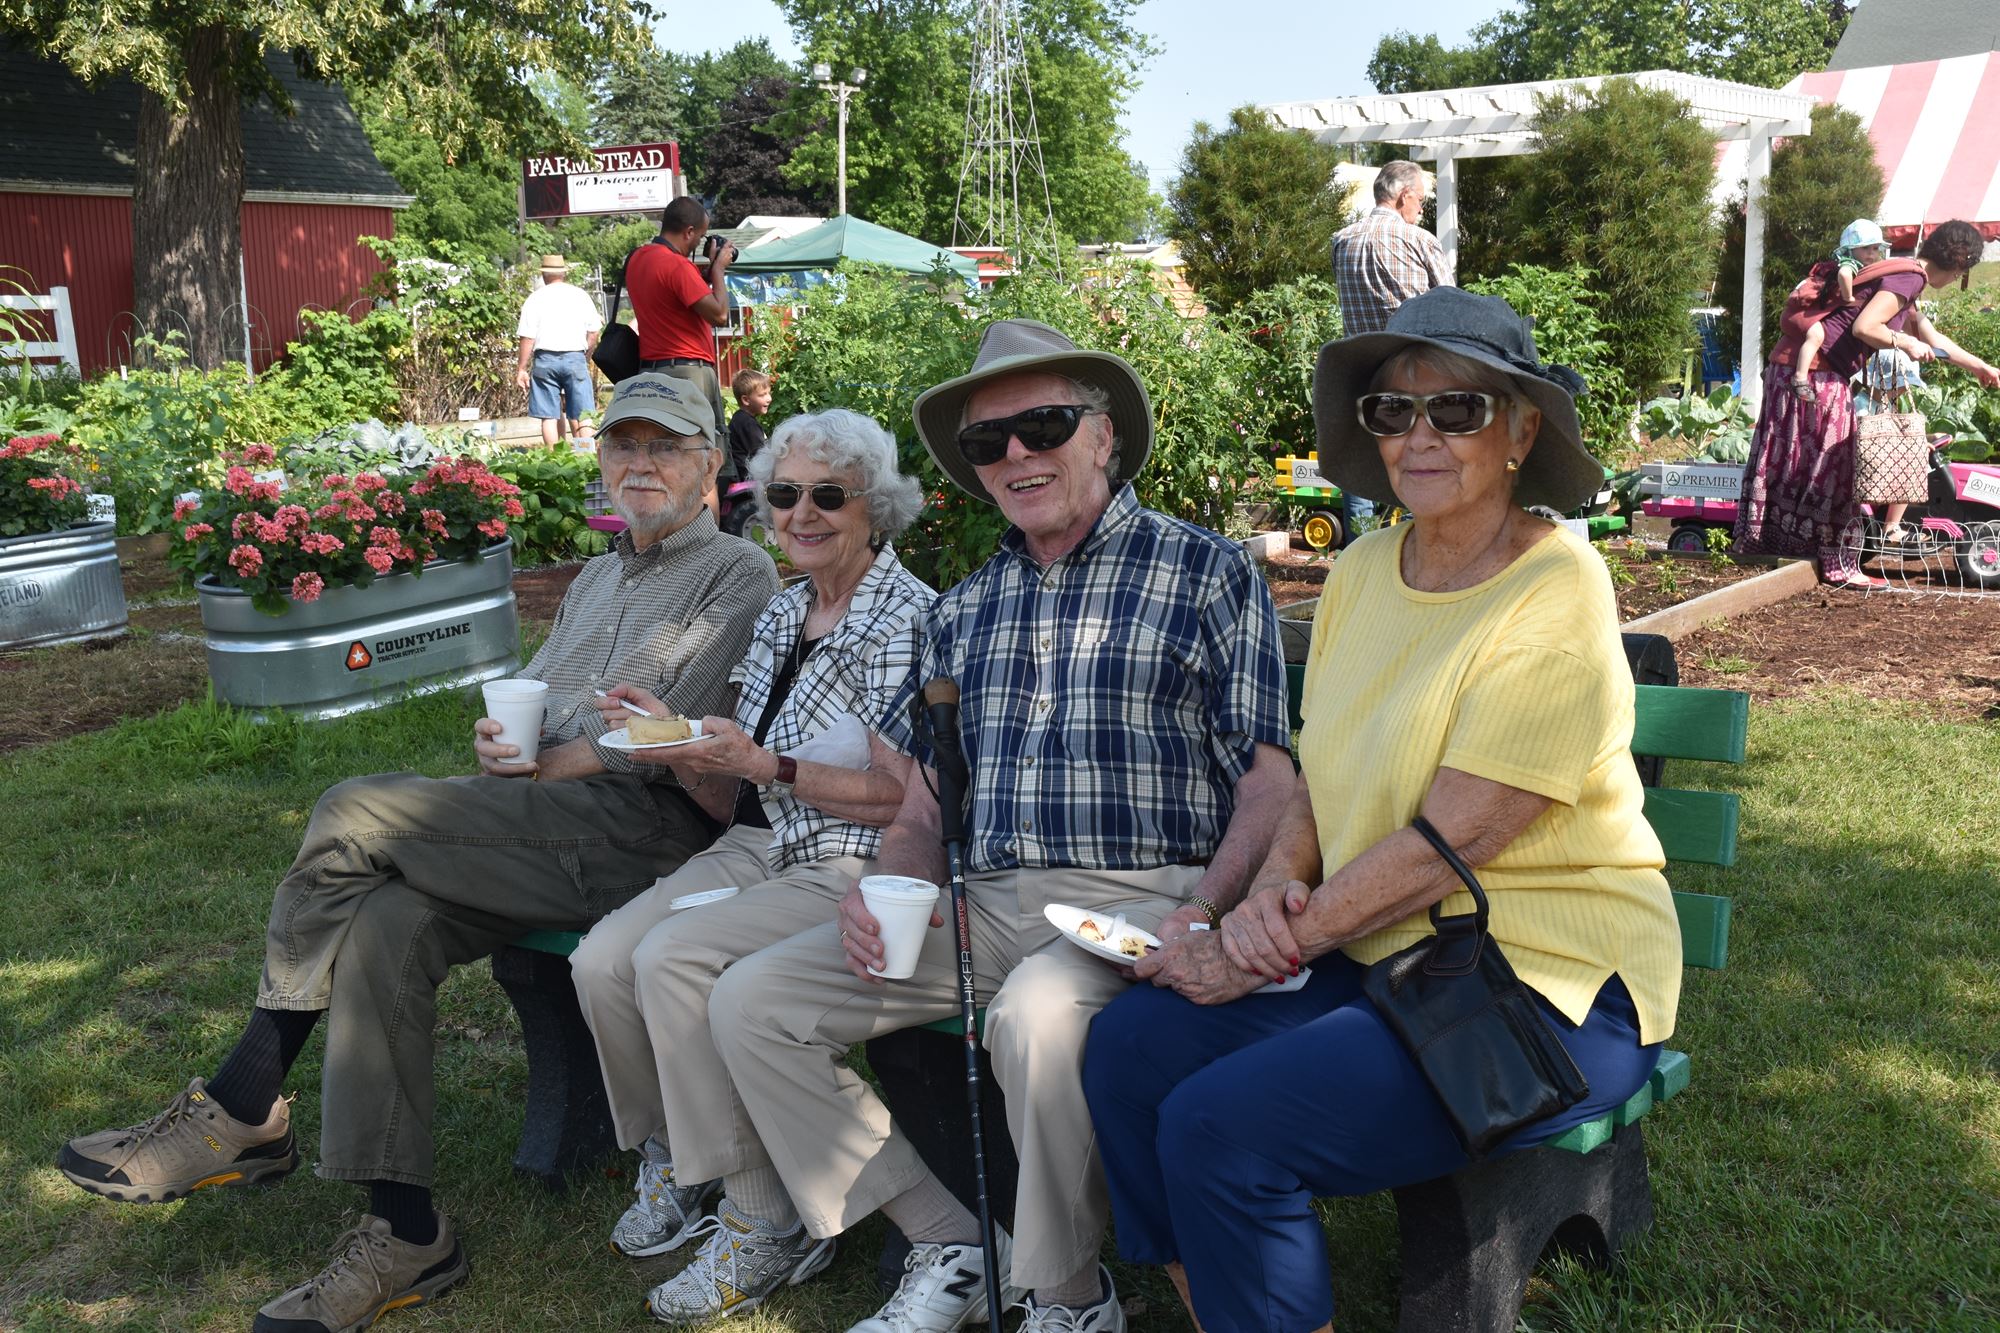 Senior Citizens Day - Tuesday, July 26